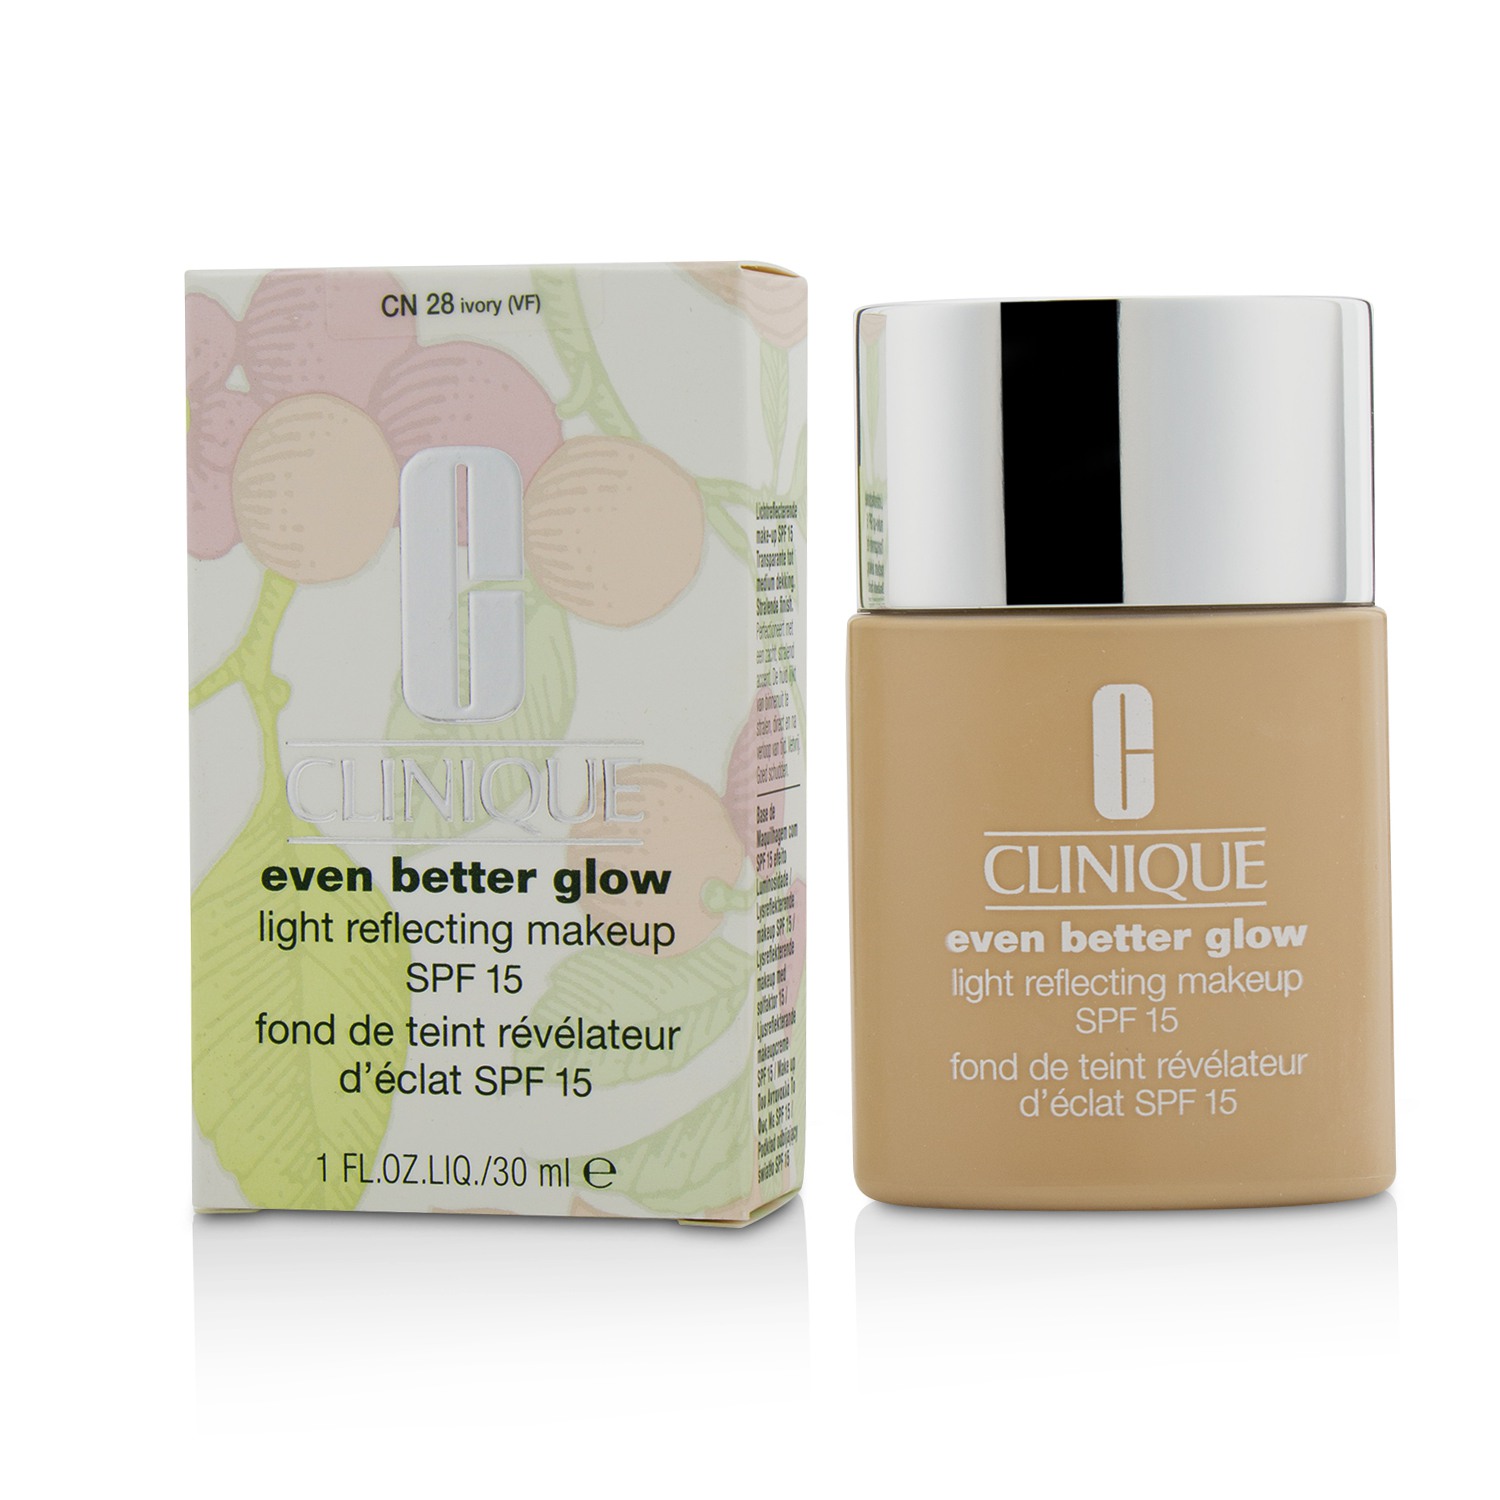 Even Better Glow Light Reflecting Makeup SPF 15 - # CN 28 Ivory Clinique Image